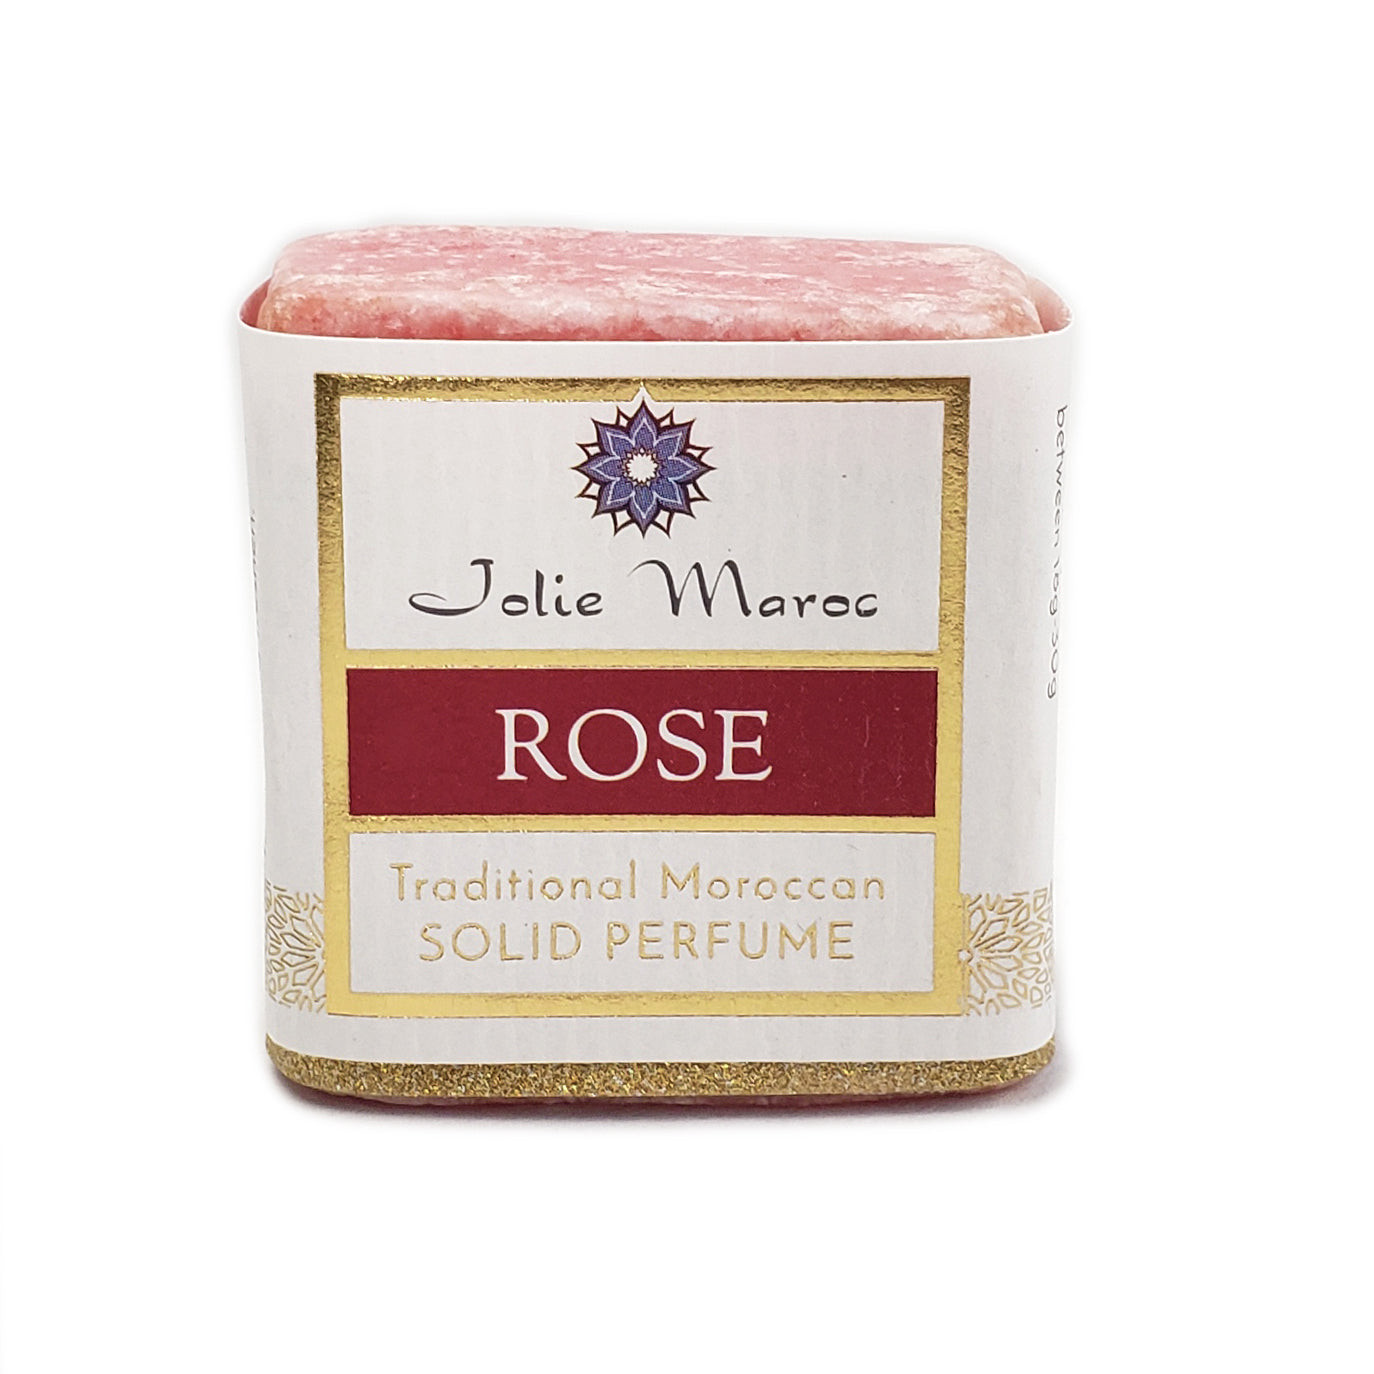 Rose Solid Perfume